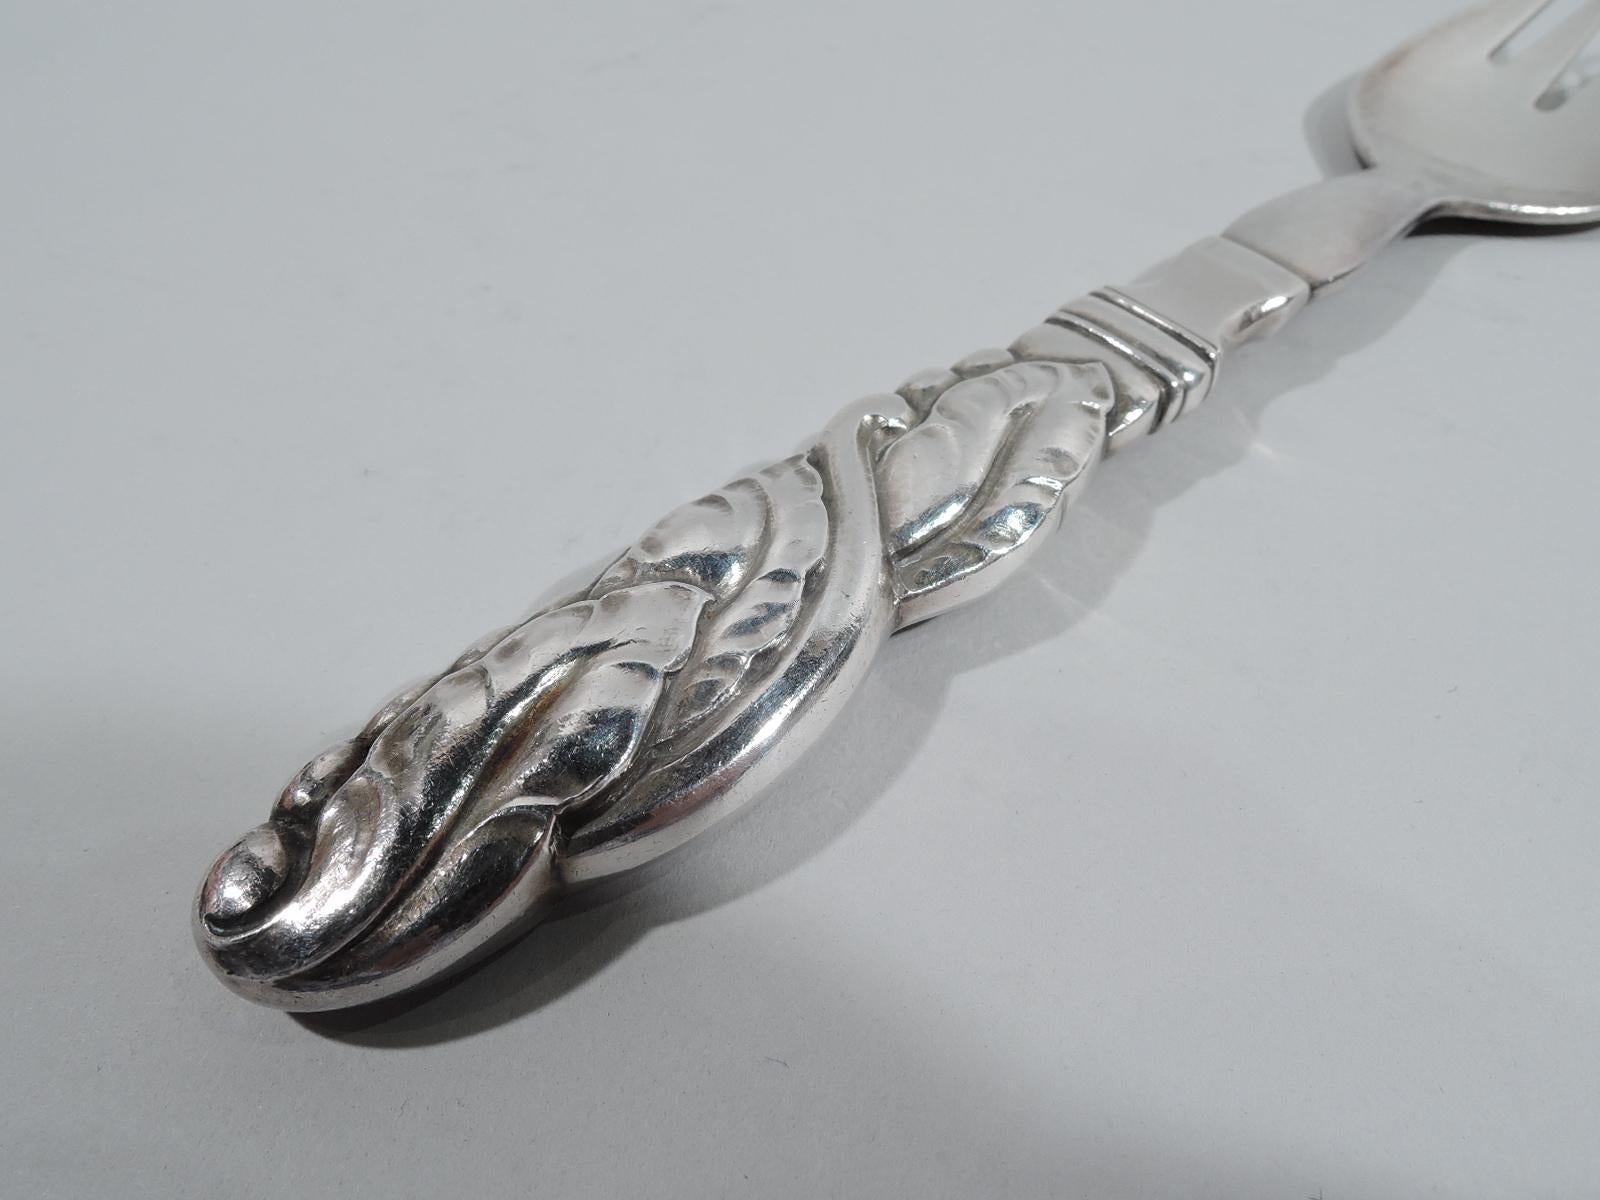 Ornamental sterling silver serving fork. Made by Georg Jensen in Copenhagen. Handle leaf-wrapped and entwined with scrolls. Bottom edged with kernels or seeds. Hand-hammered shank with 4 tines. Illustrated in: Drucker. Georg Jensen, 2001, 2nd rev.